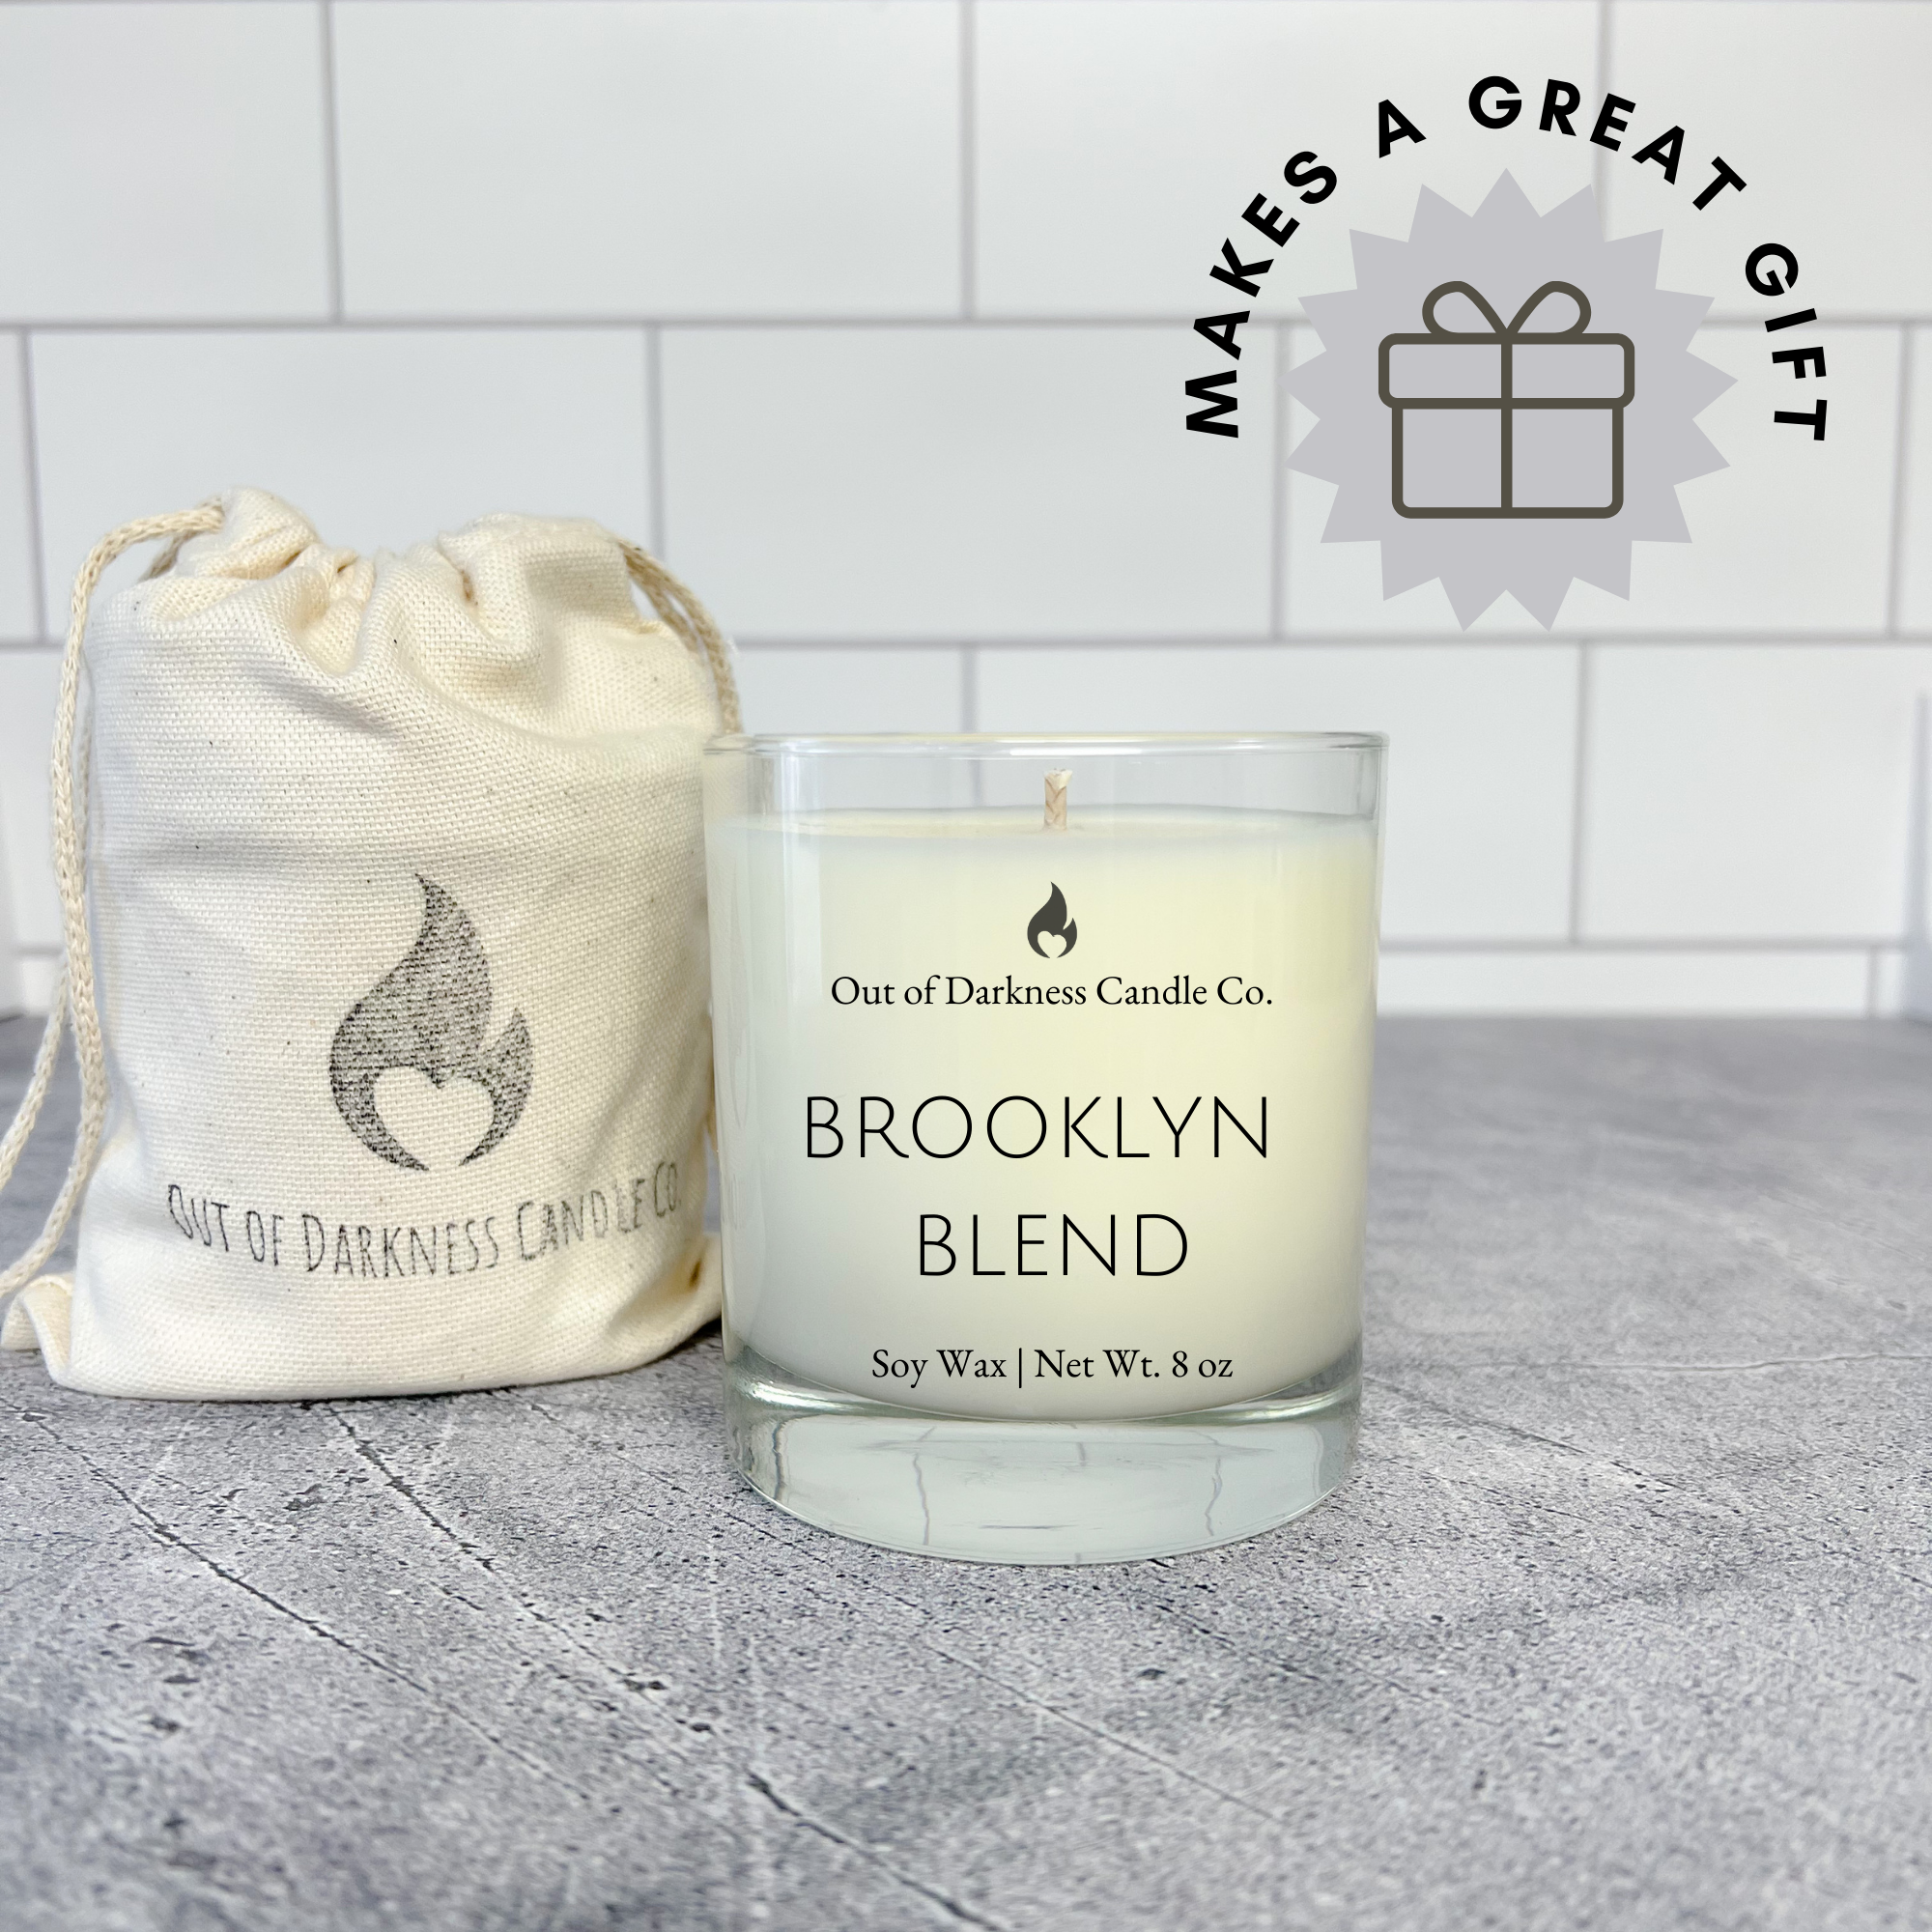 white tile background with present graphic in the corner that says makes a great gift - photo of a glass jar candle that says Brooklyn Blend in all caps with a wrapped candle next to it - wrapped in a muslin bag that has the company logo a black flame and the company name Out of Darkness Candle Co